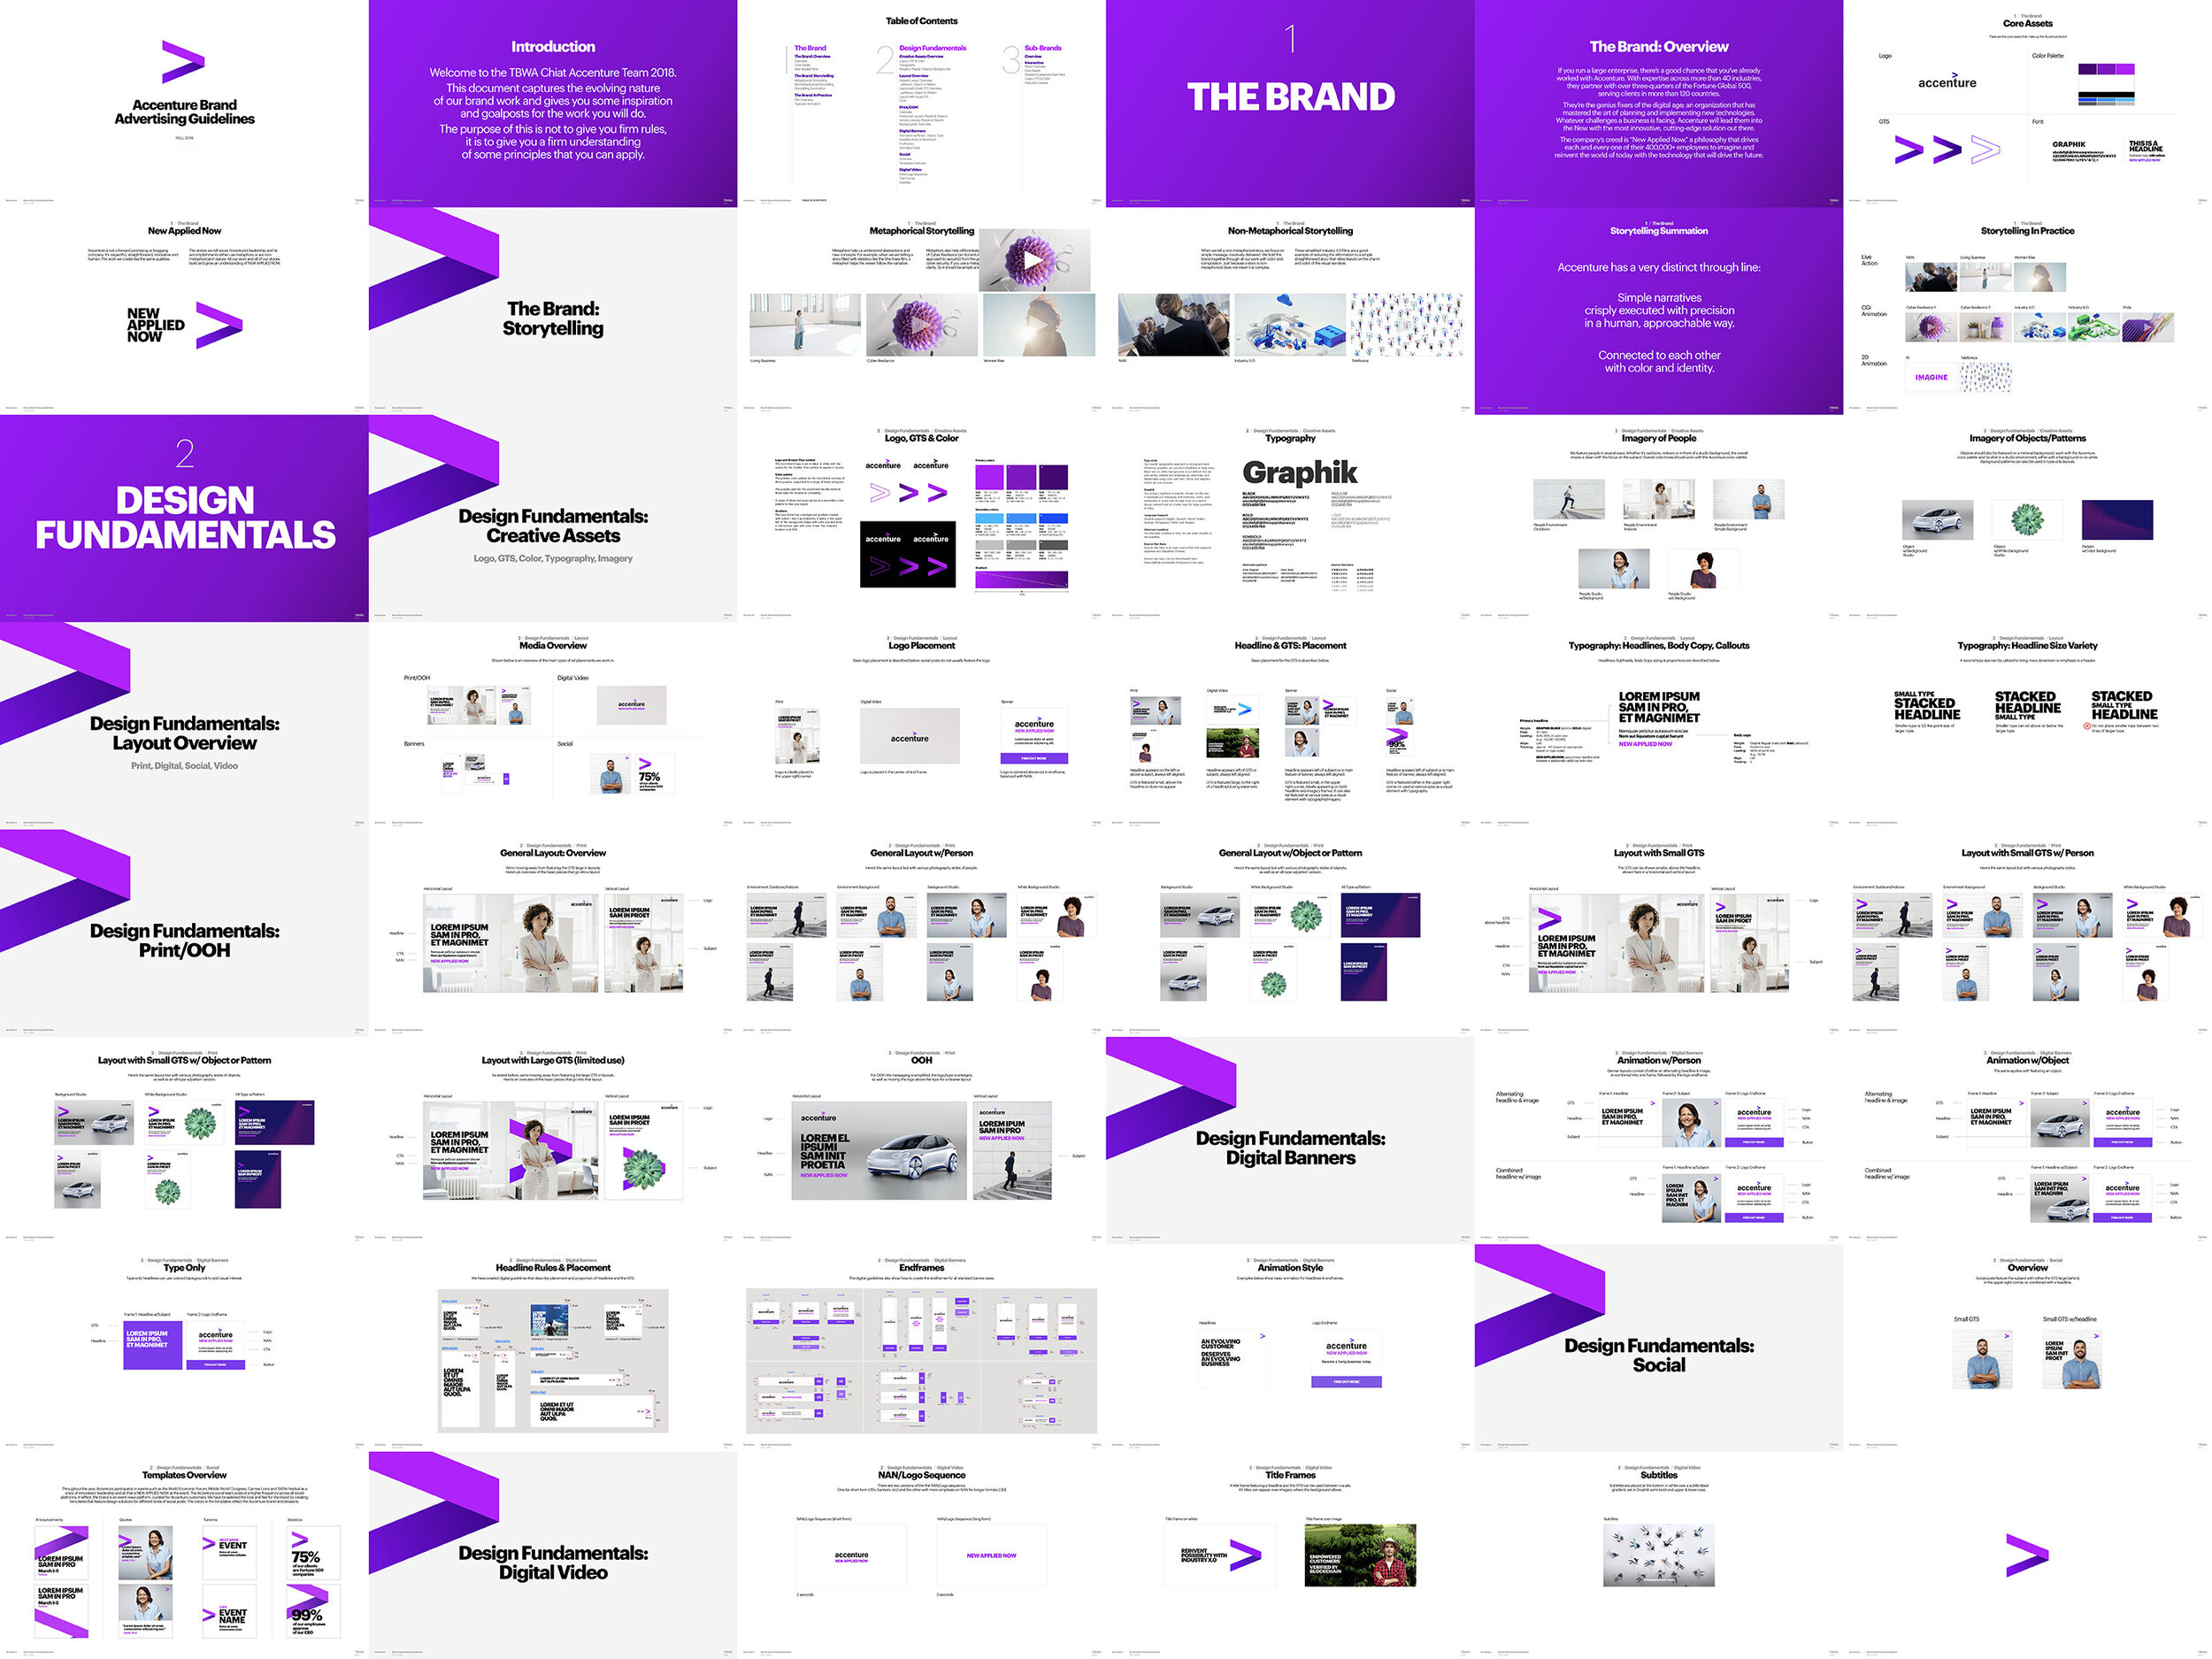 Accenture brand guidelines blueshield carefirst insurance